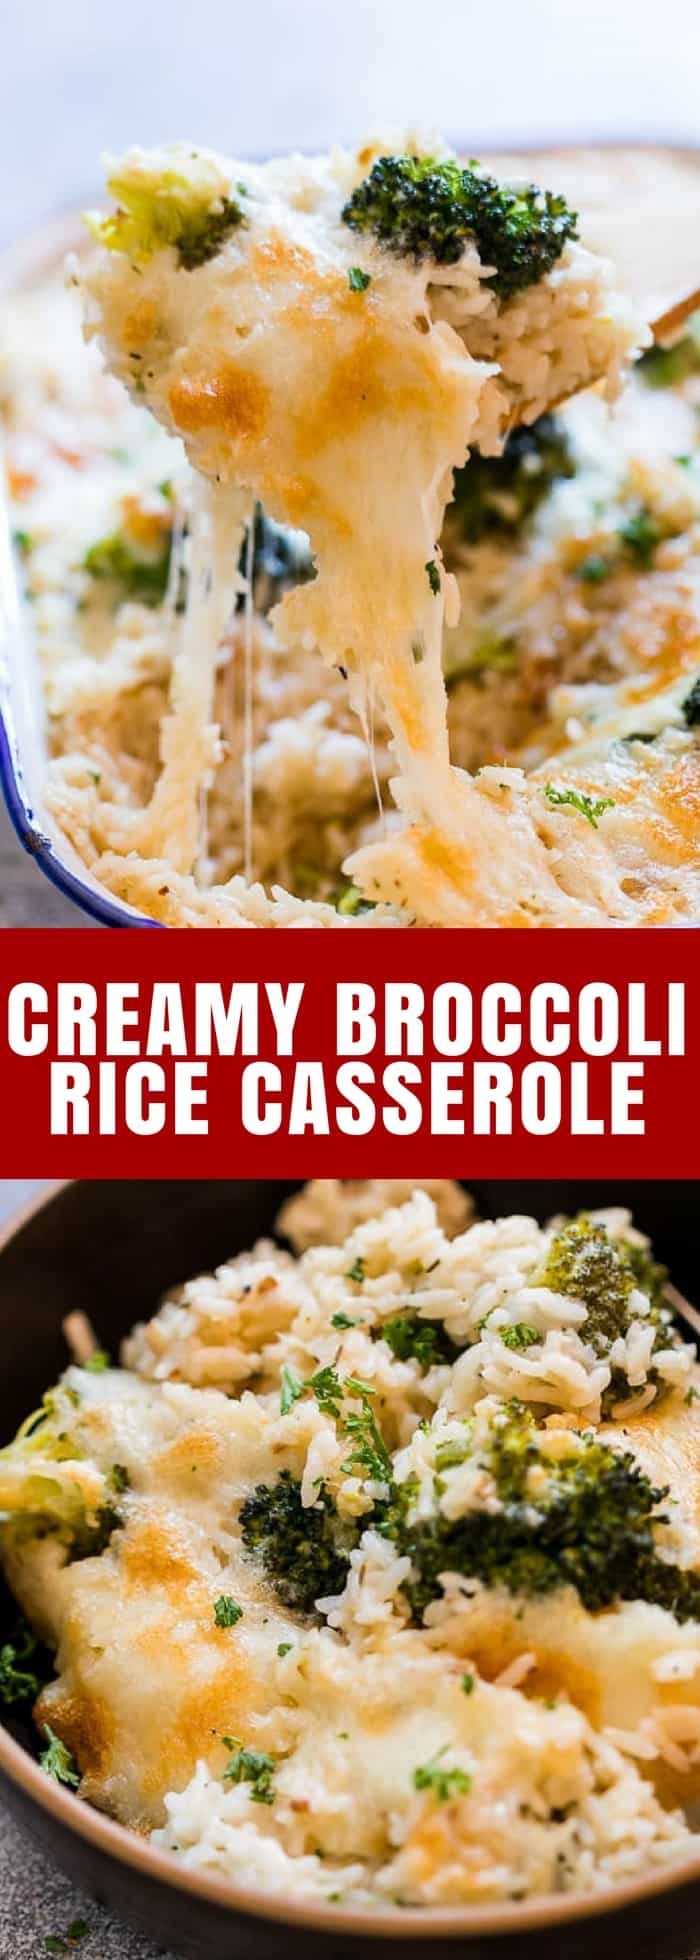 Creamy Broccoli Rice Casserole is a one pot dish thats cheesy, vegetarian and almost tastes like creamy risotto. Made with white rice and lots of broccoli, this is a meal in itself!